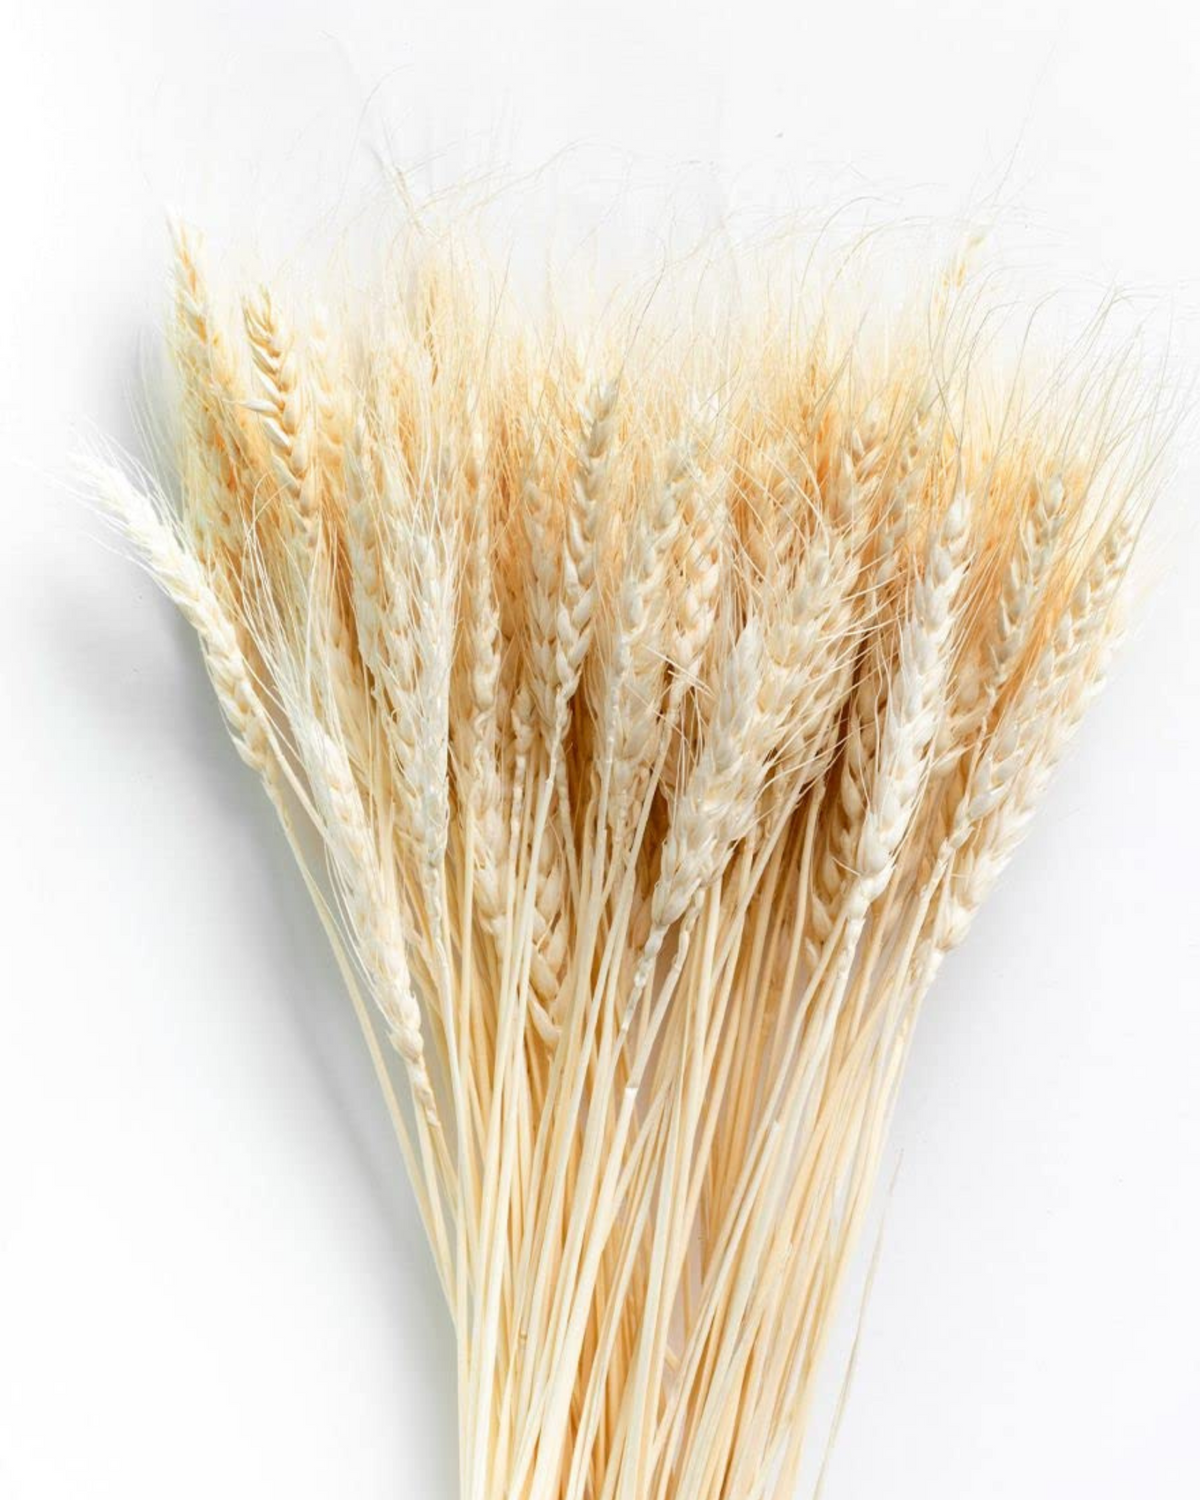 Dried Wheat Stalks for Decor - Set of 100